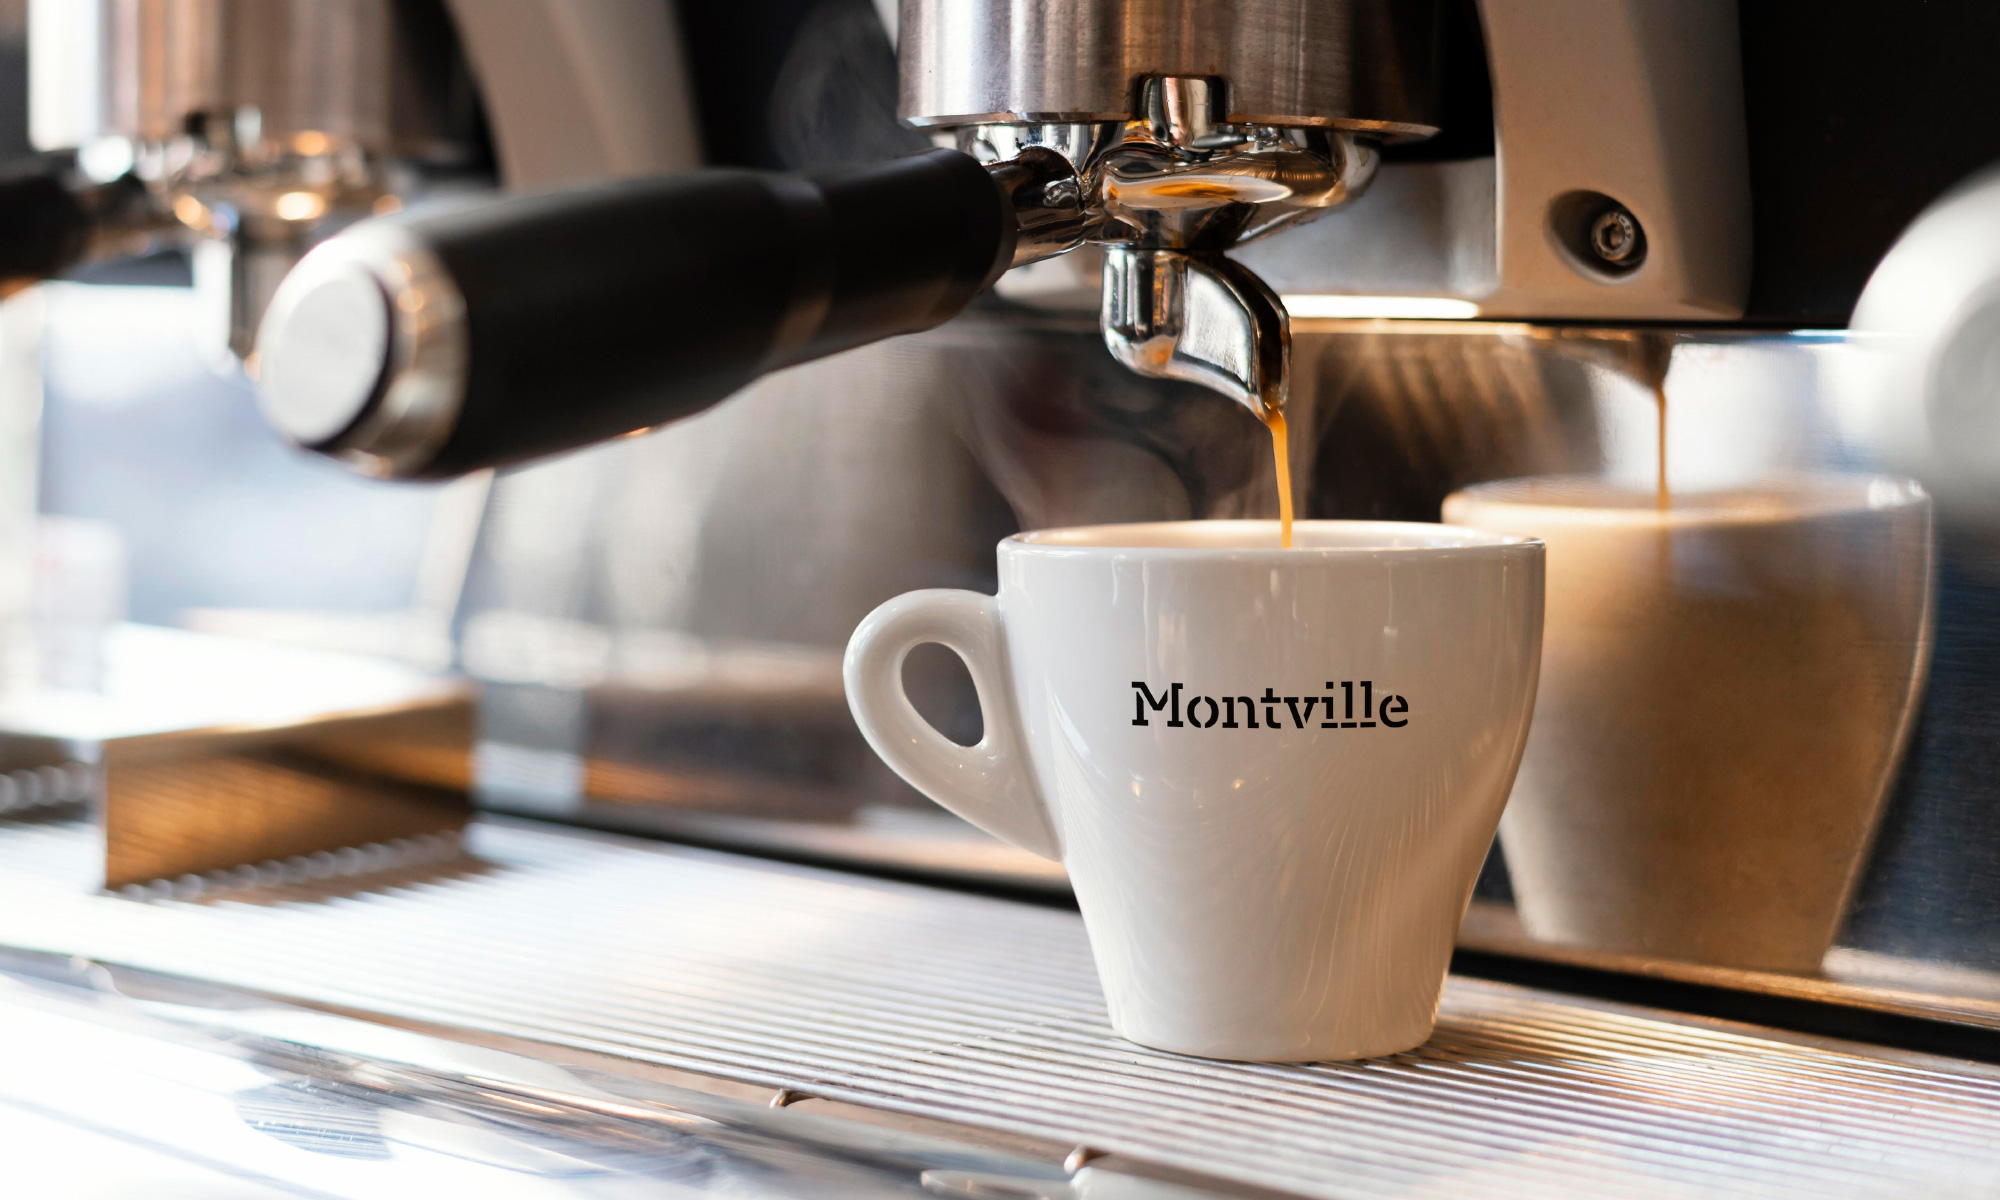 Montville Coffee logo on cup